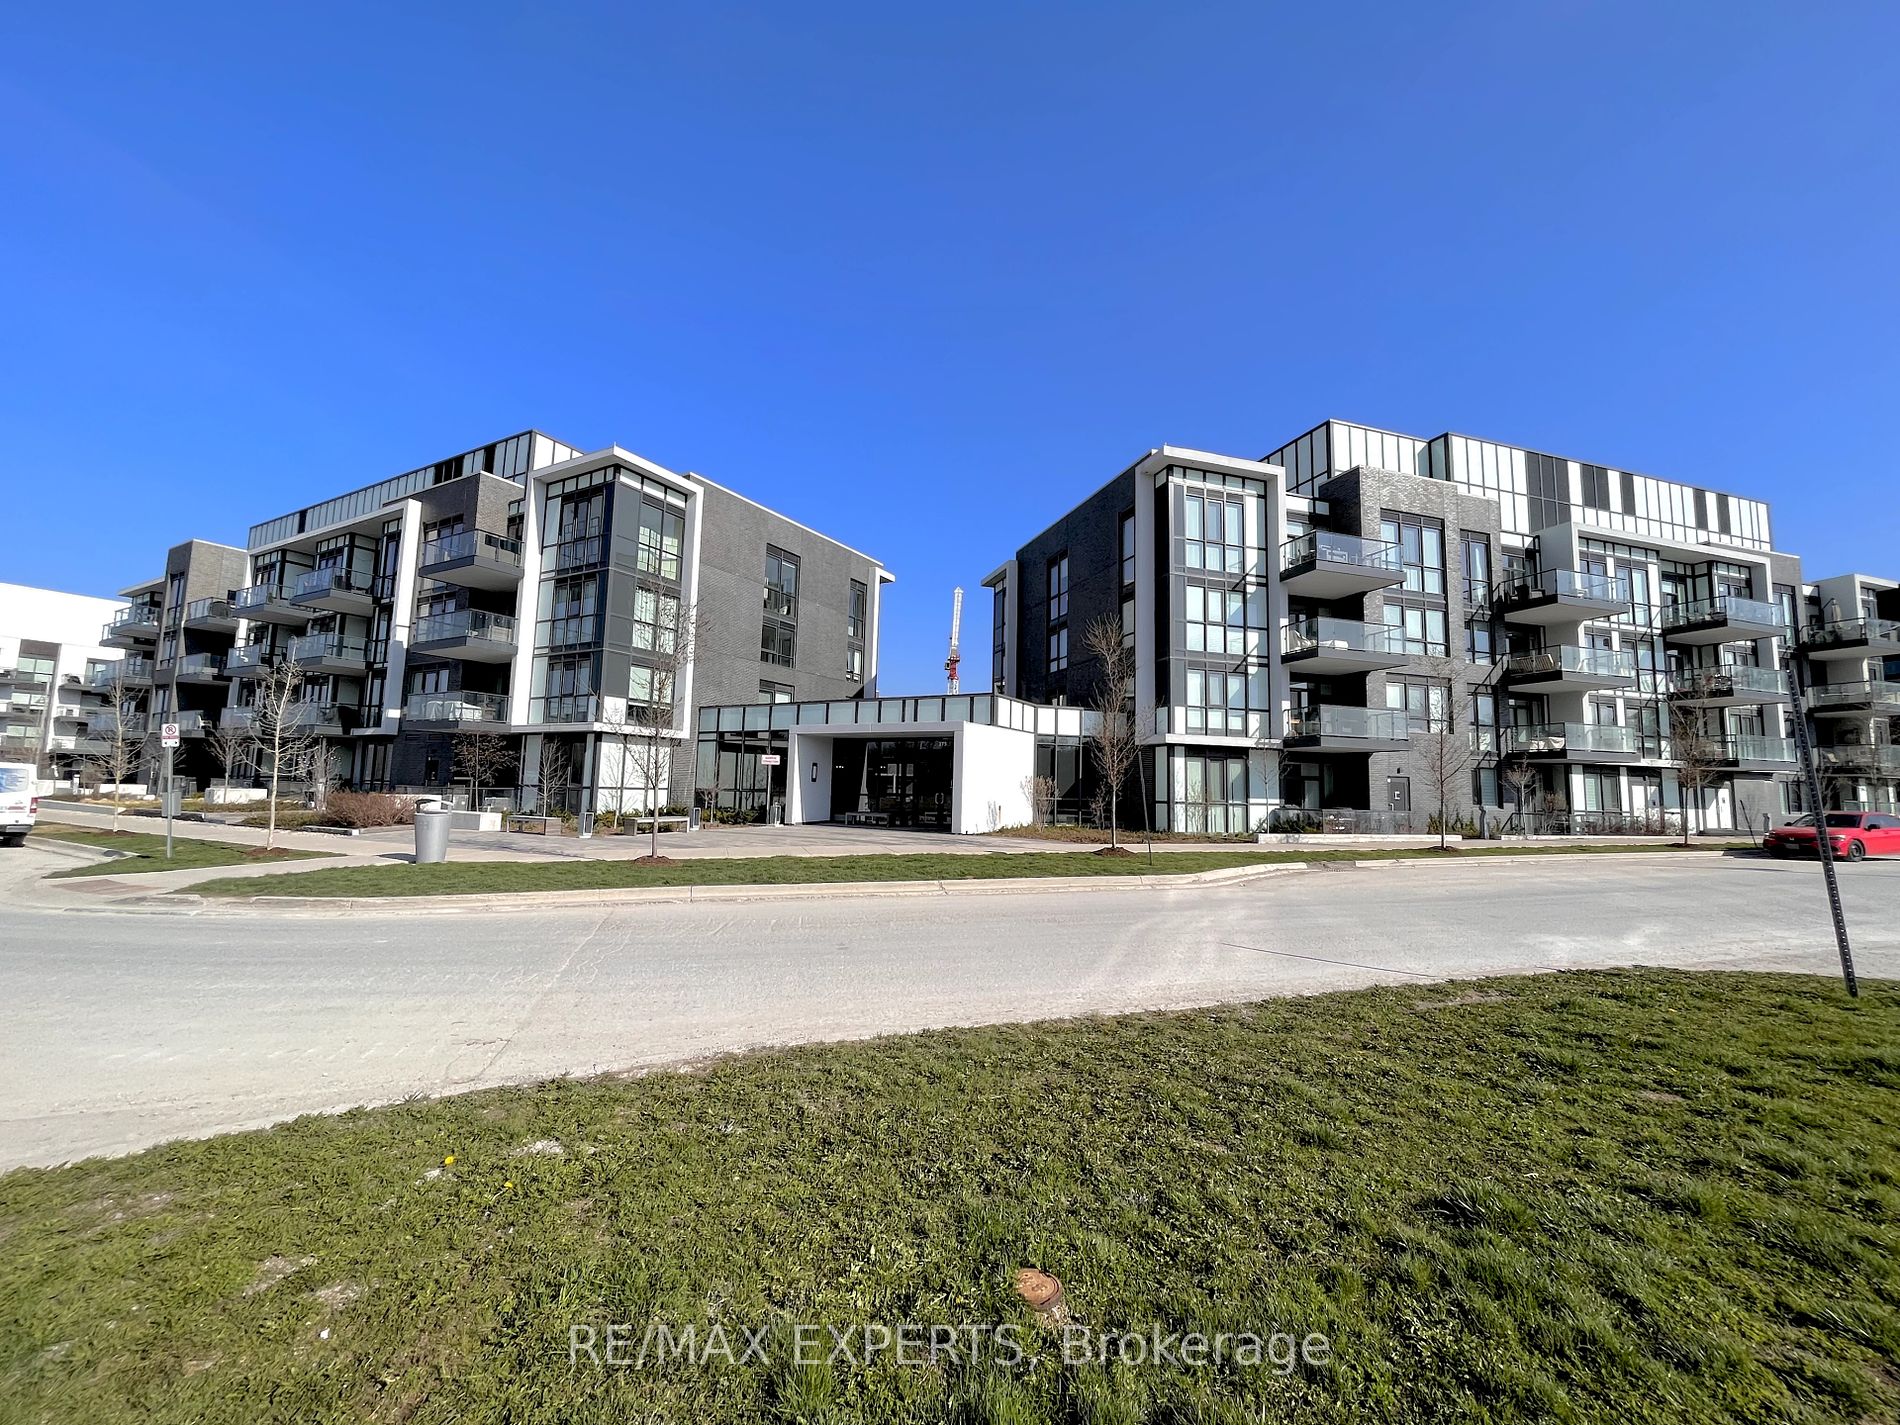 Condo Apt house for sale at 375 Sea Ray Ave Innisfil Ontario